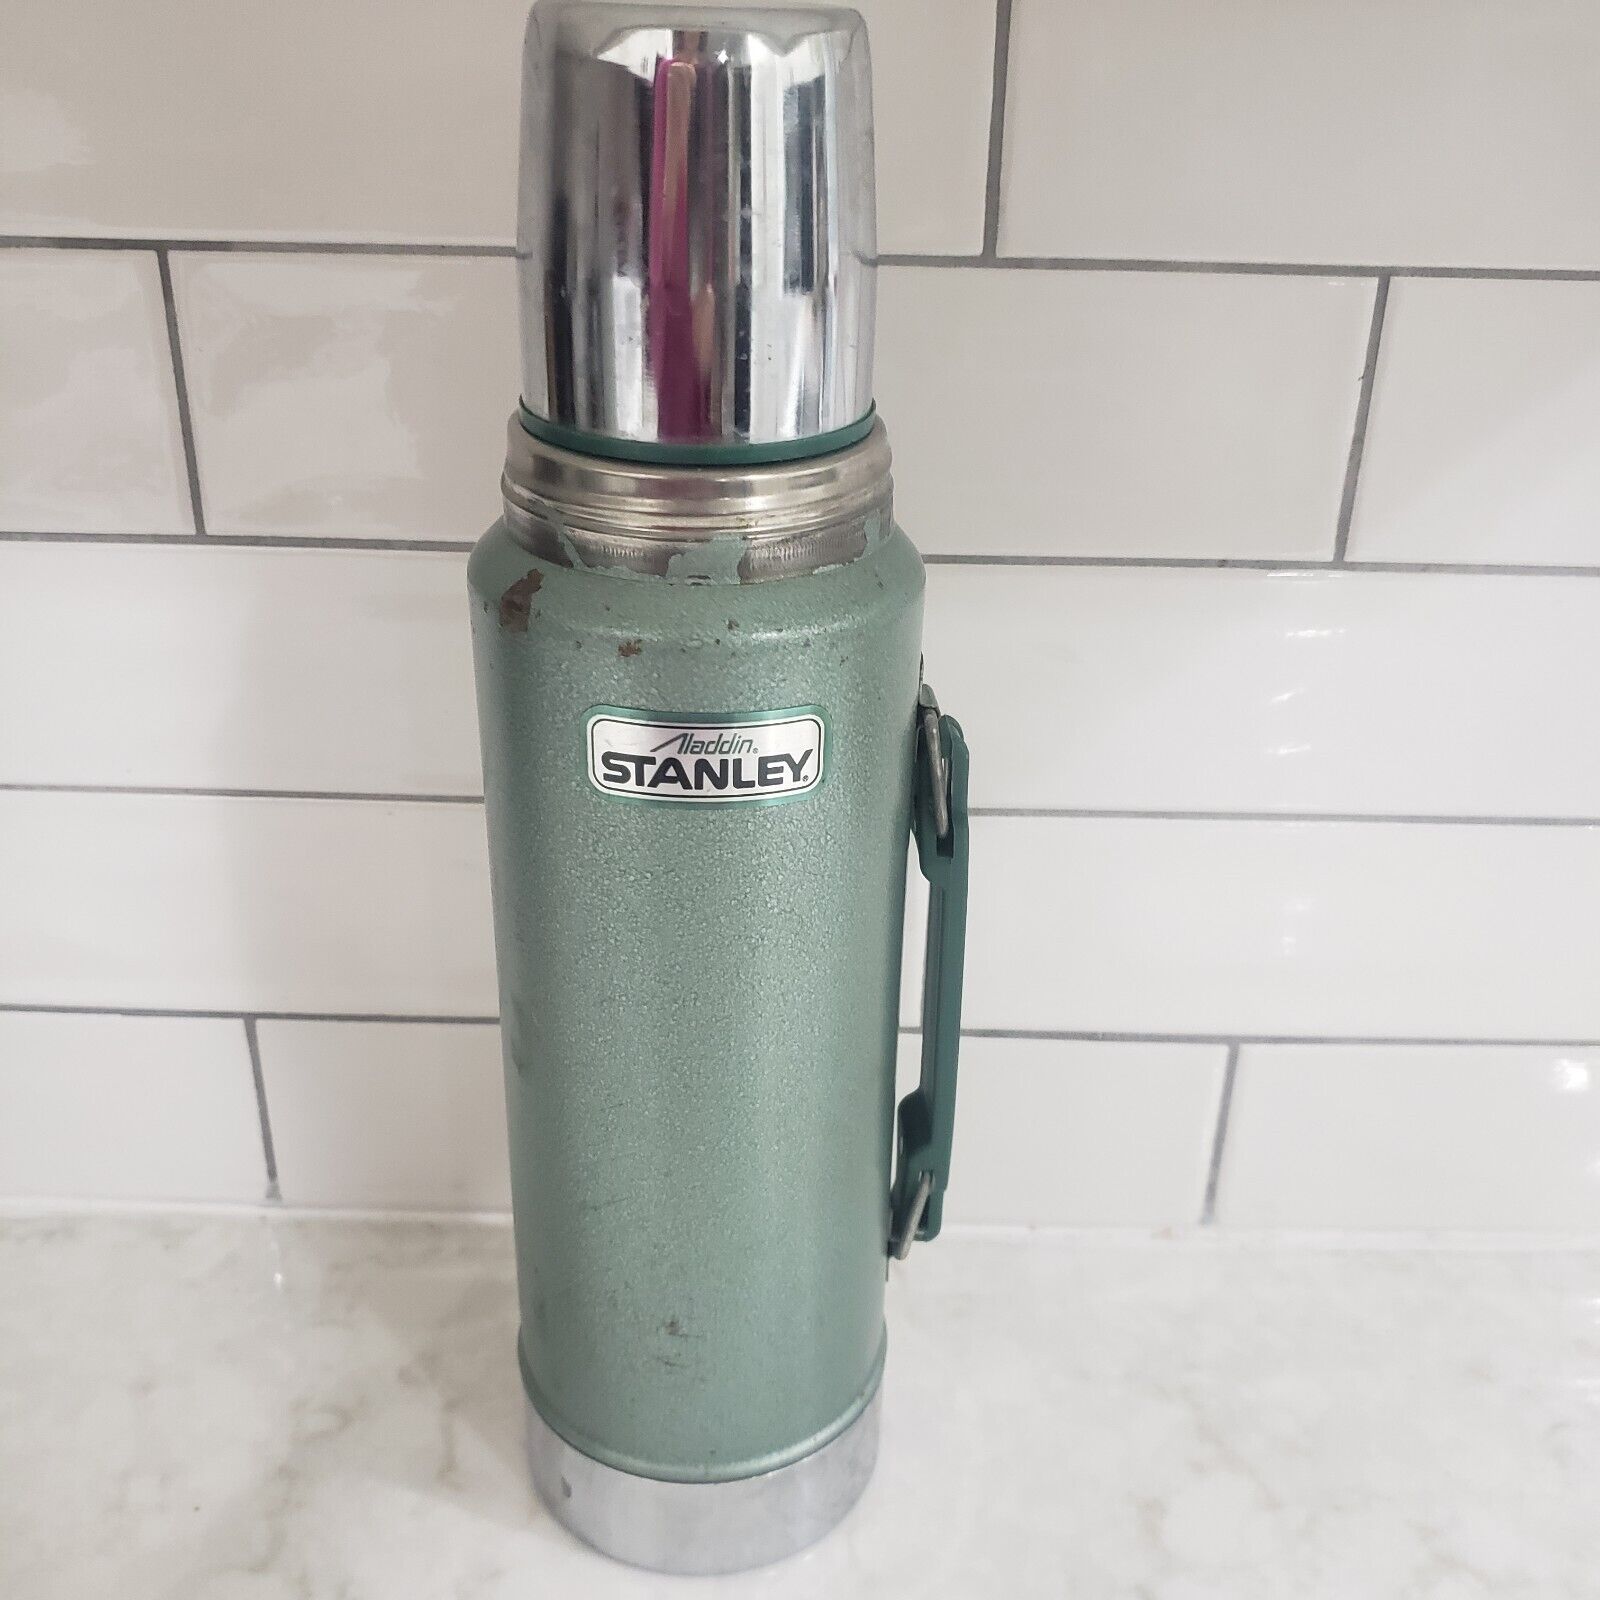 Vintage Stanley Aladdin Green Vacuum Bottle Thermos A-944DH- 1 Quart Made in USA